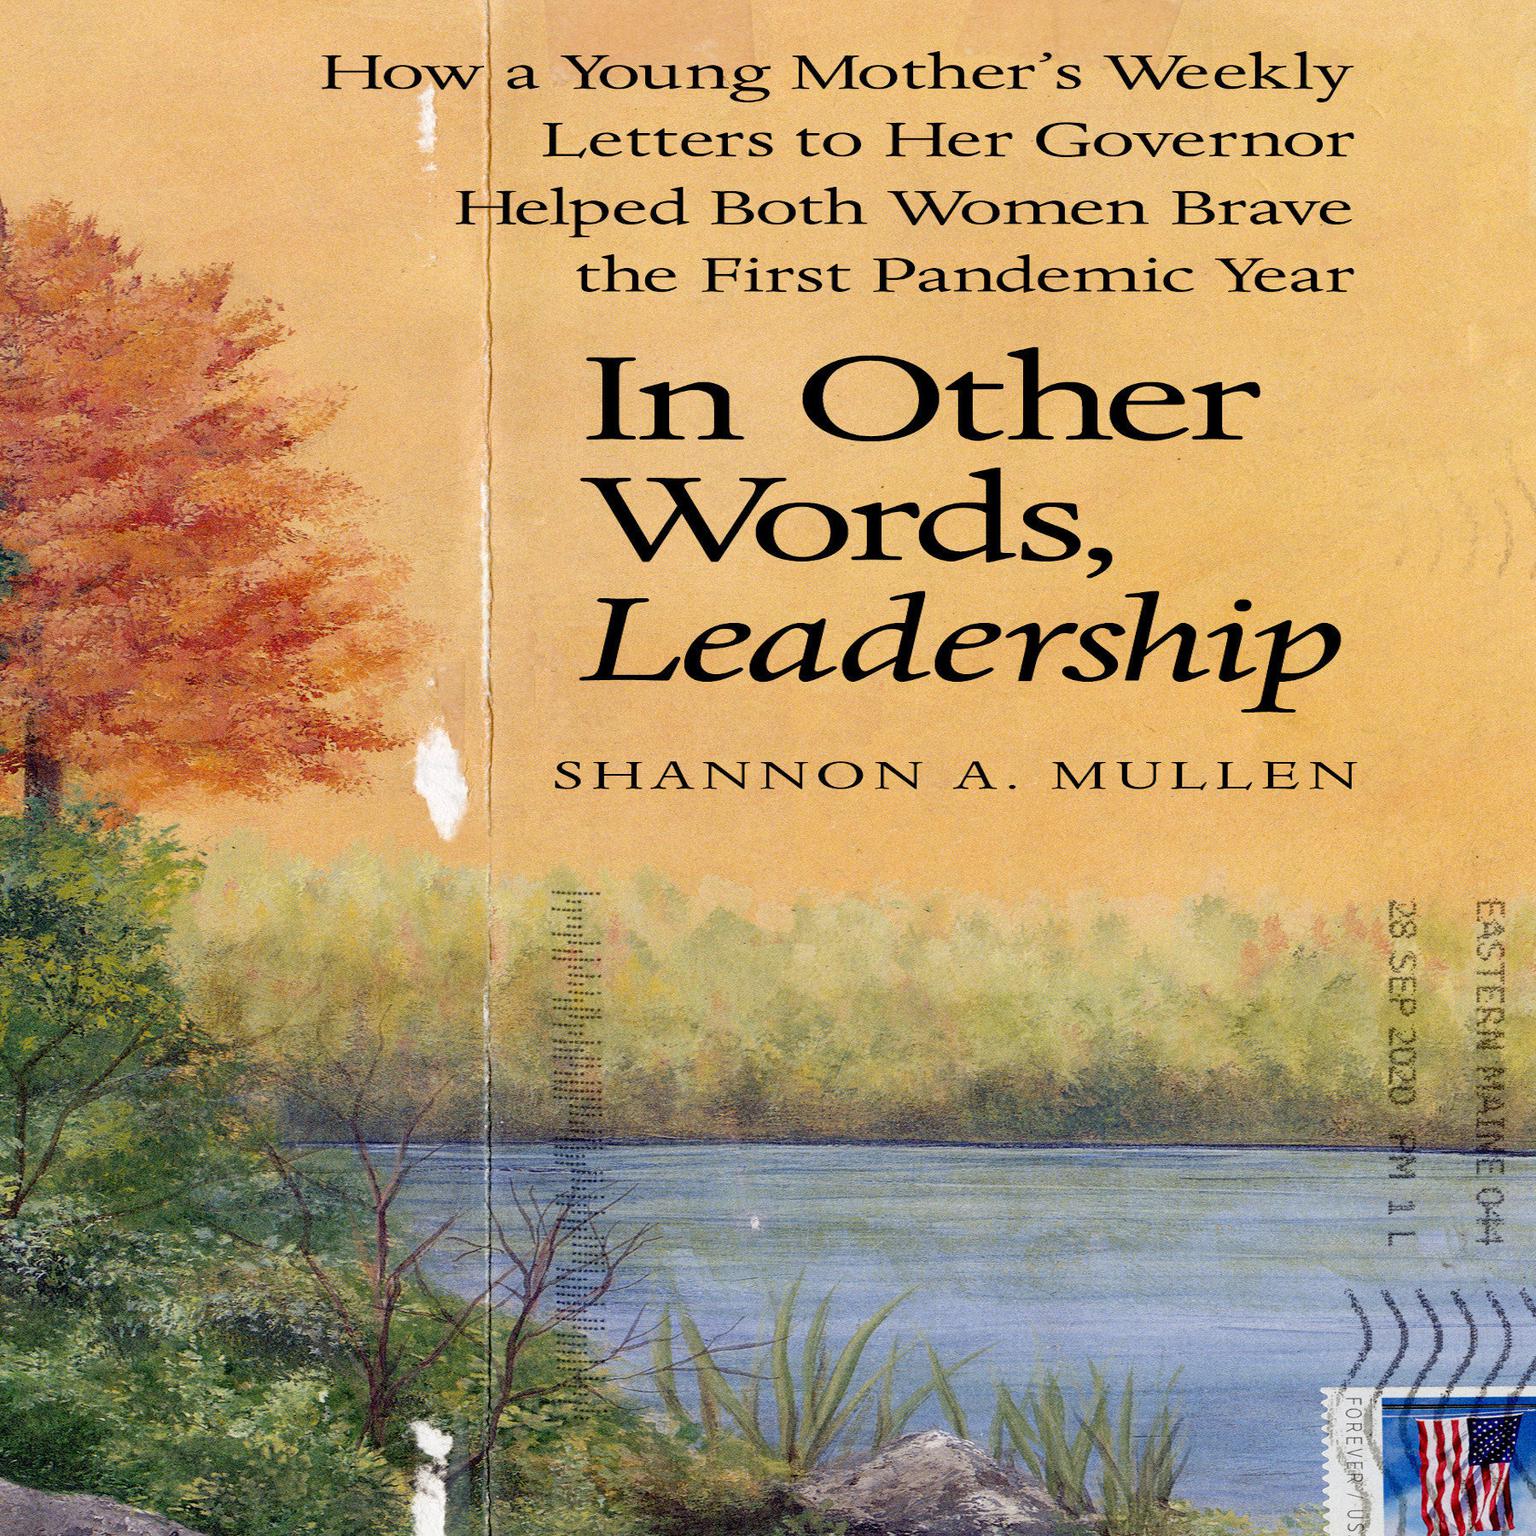 In Other Words, Leadership: How a Young Mothers Weekly Letters to Her Governor Helped Both Women Brave the First Pandemic Year Audiobook, by Shannon A. Mullen